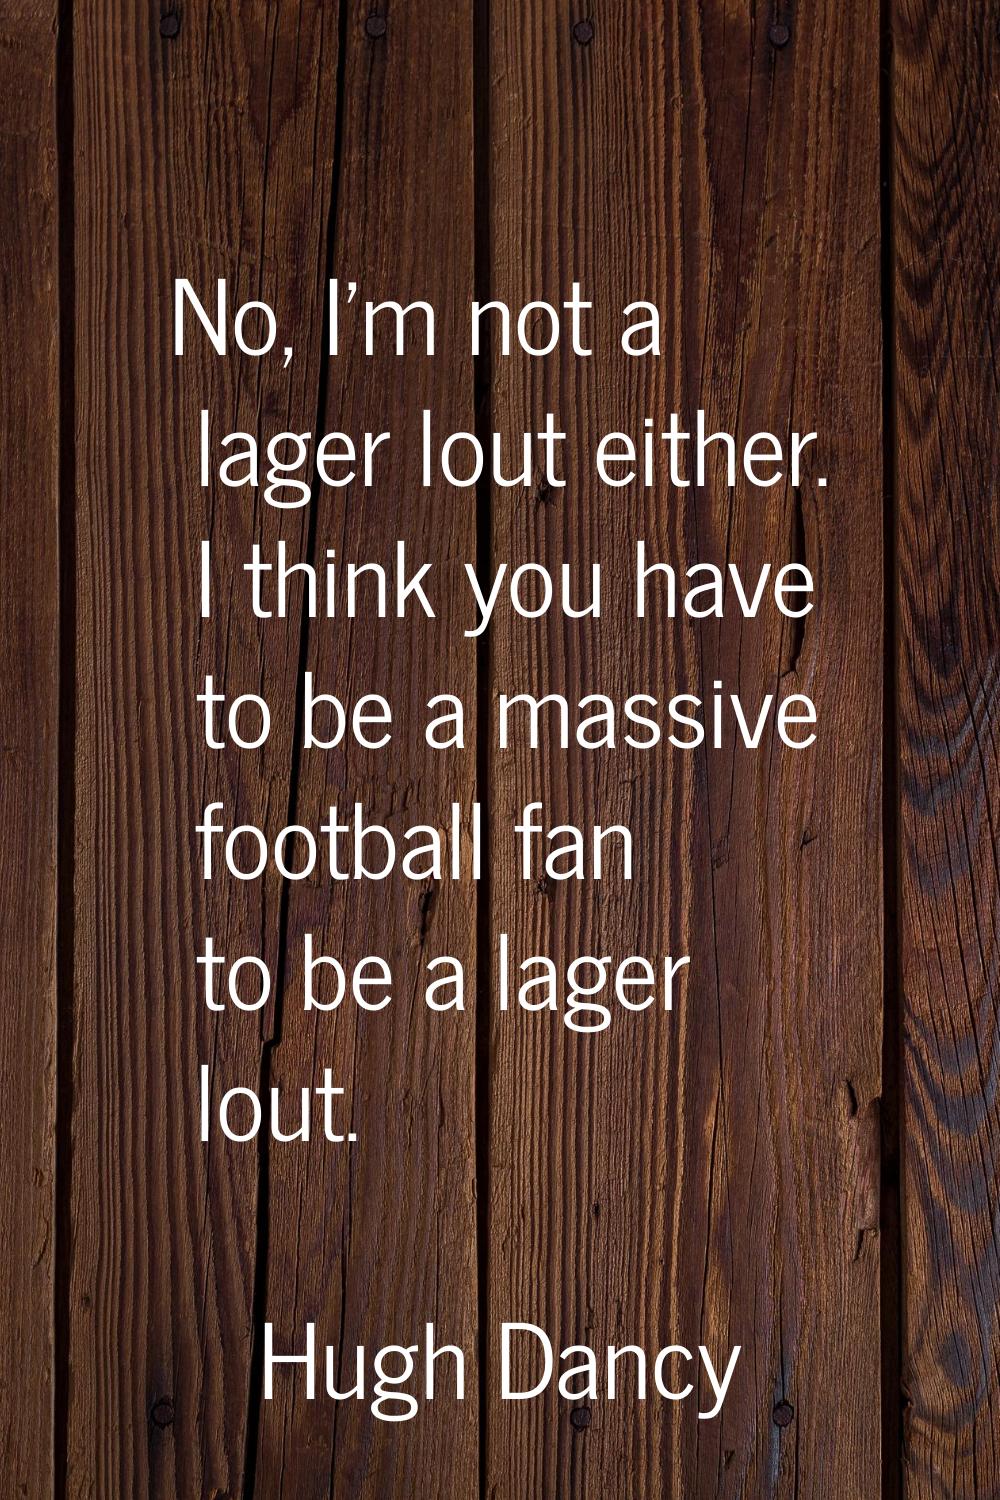 No, I'm not a lager lout either. I think you have to be a massive football fan to be a lager lout.